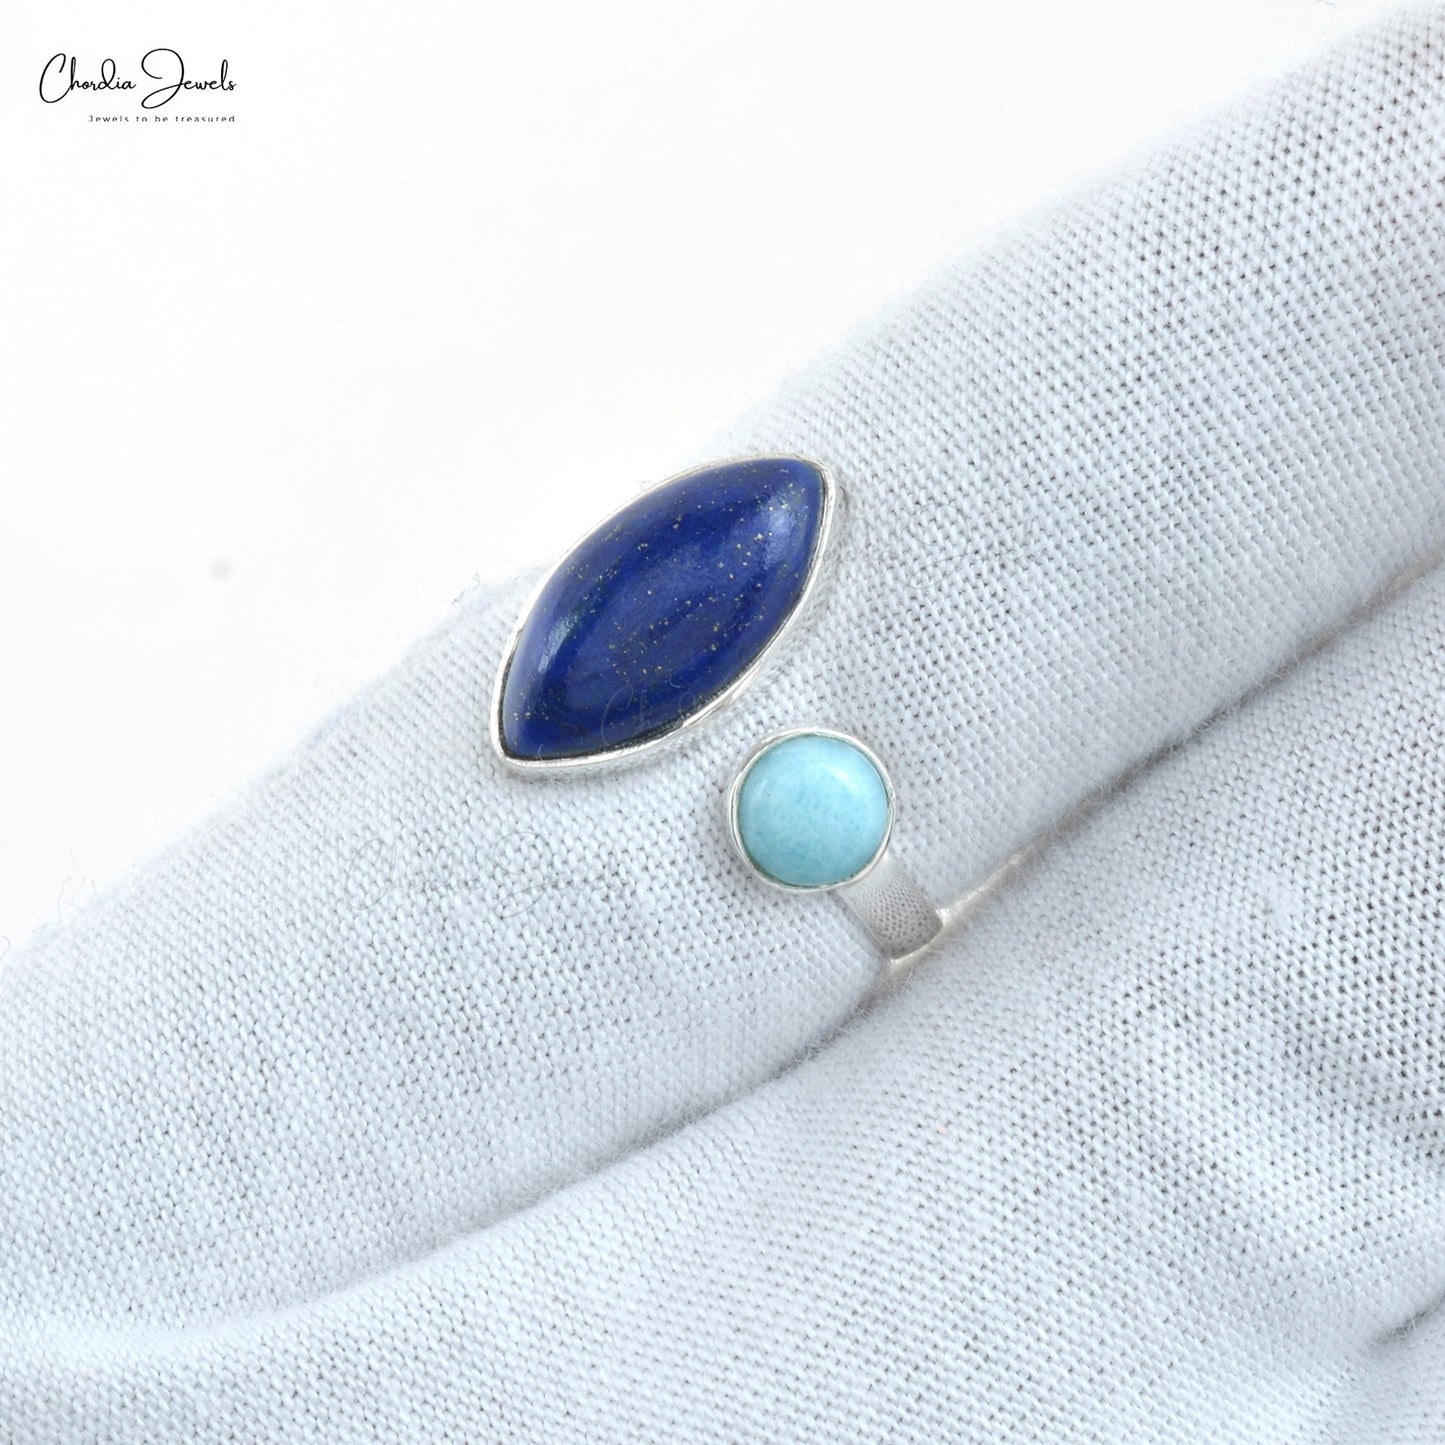 High Quality 925 Sterling Silver Lapiz-Lazuli and Turquoise Open Cuff Gemstone Ring At Discount Price